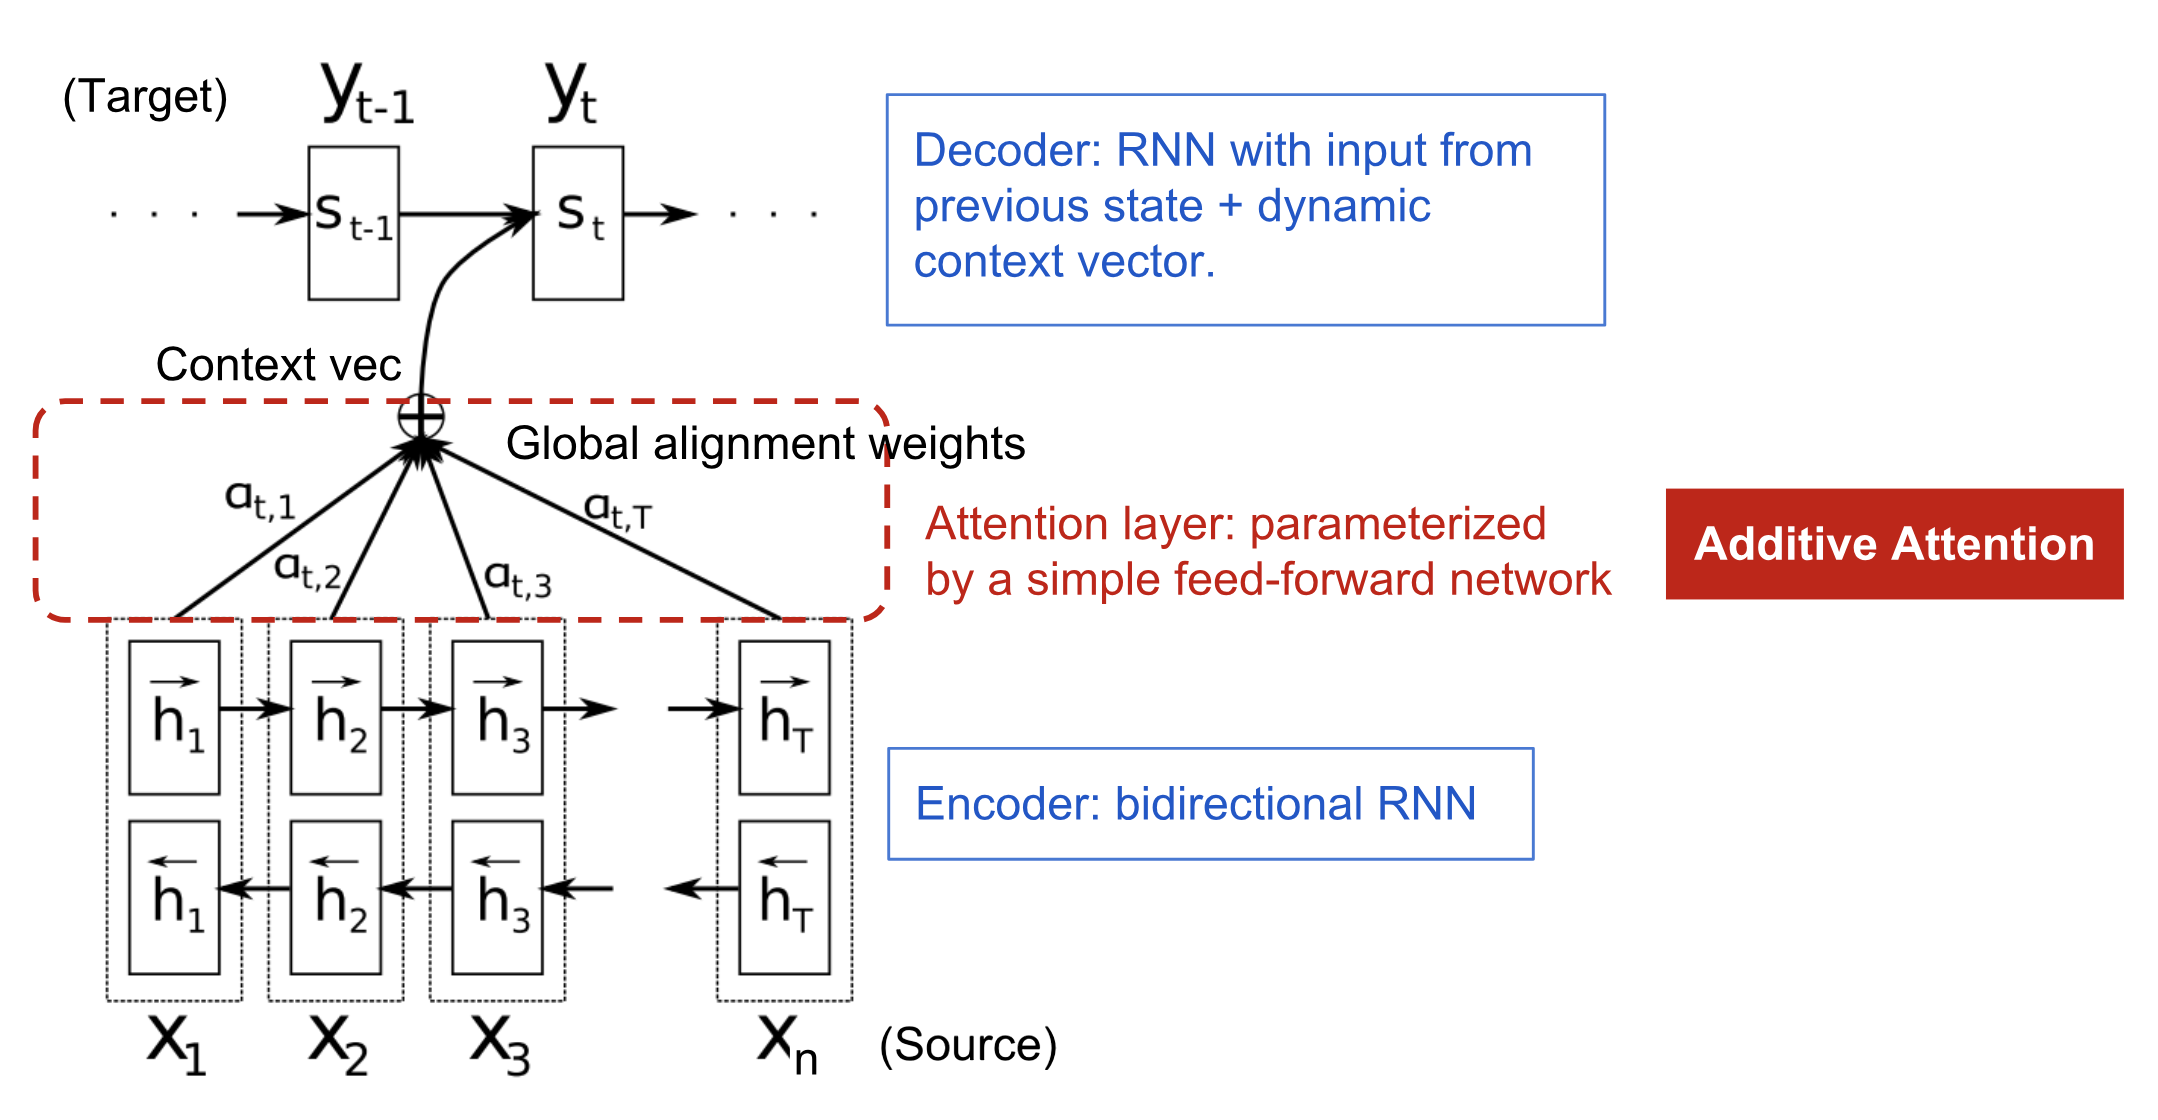 encoder-decoder model with additive attention layer